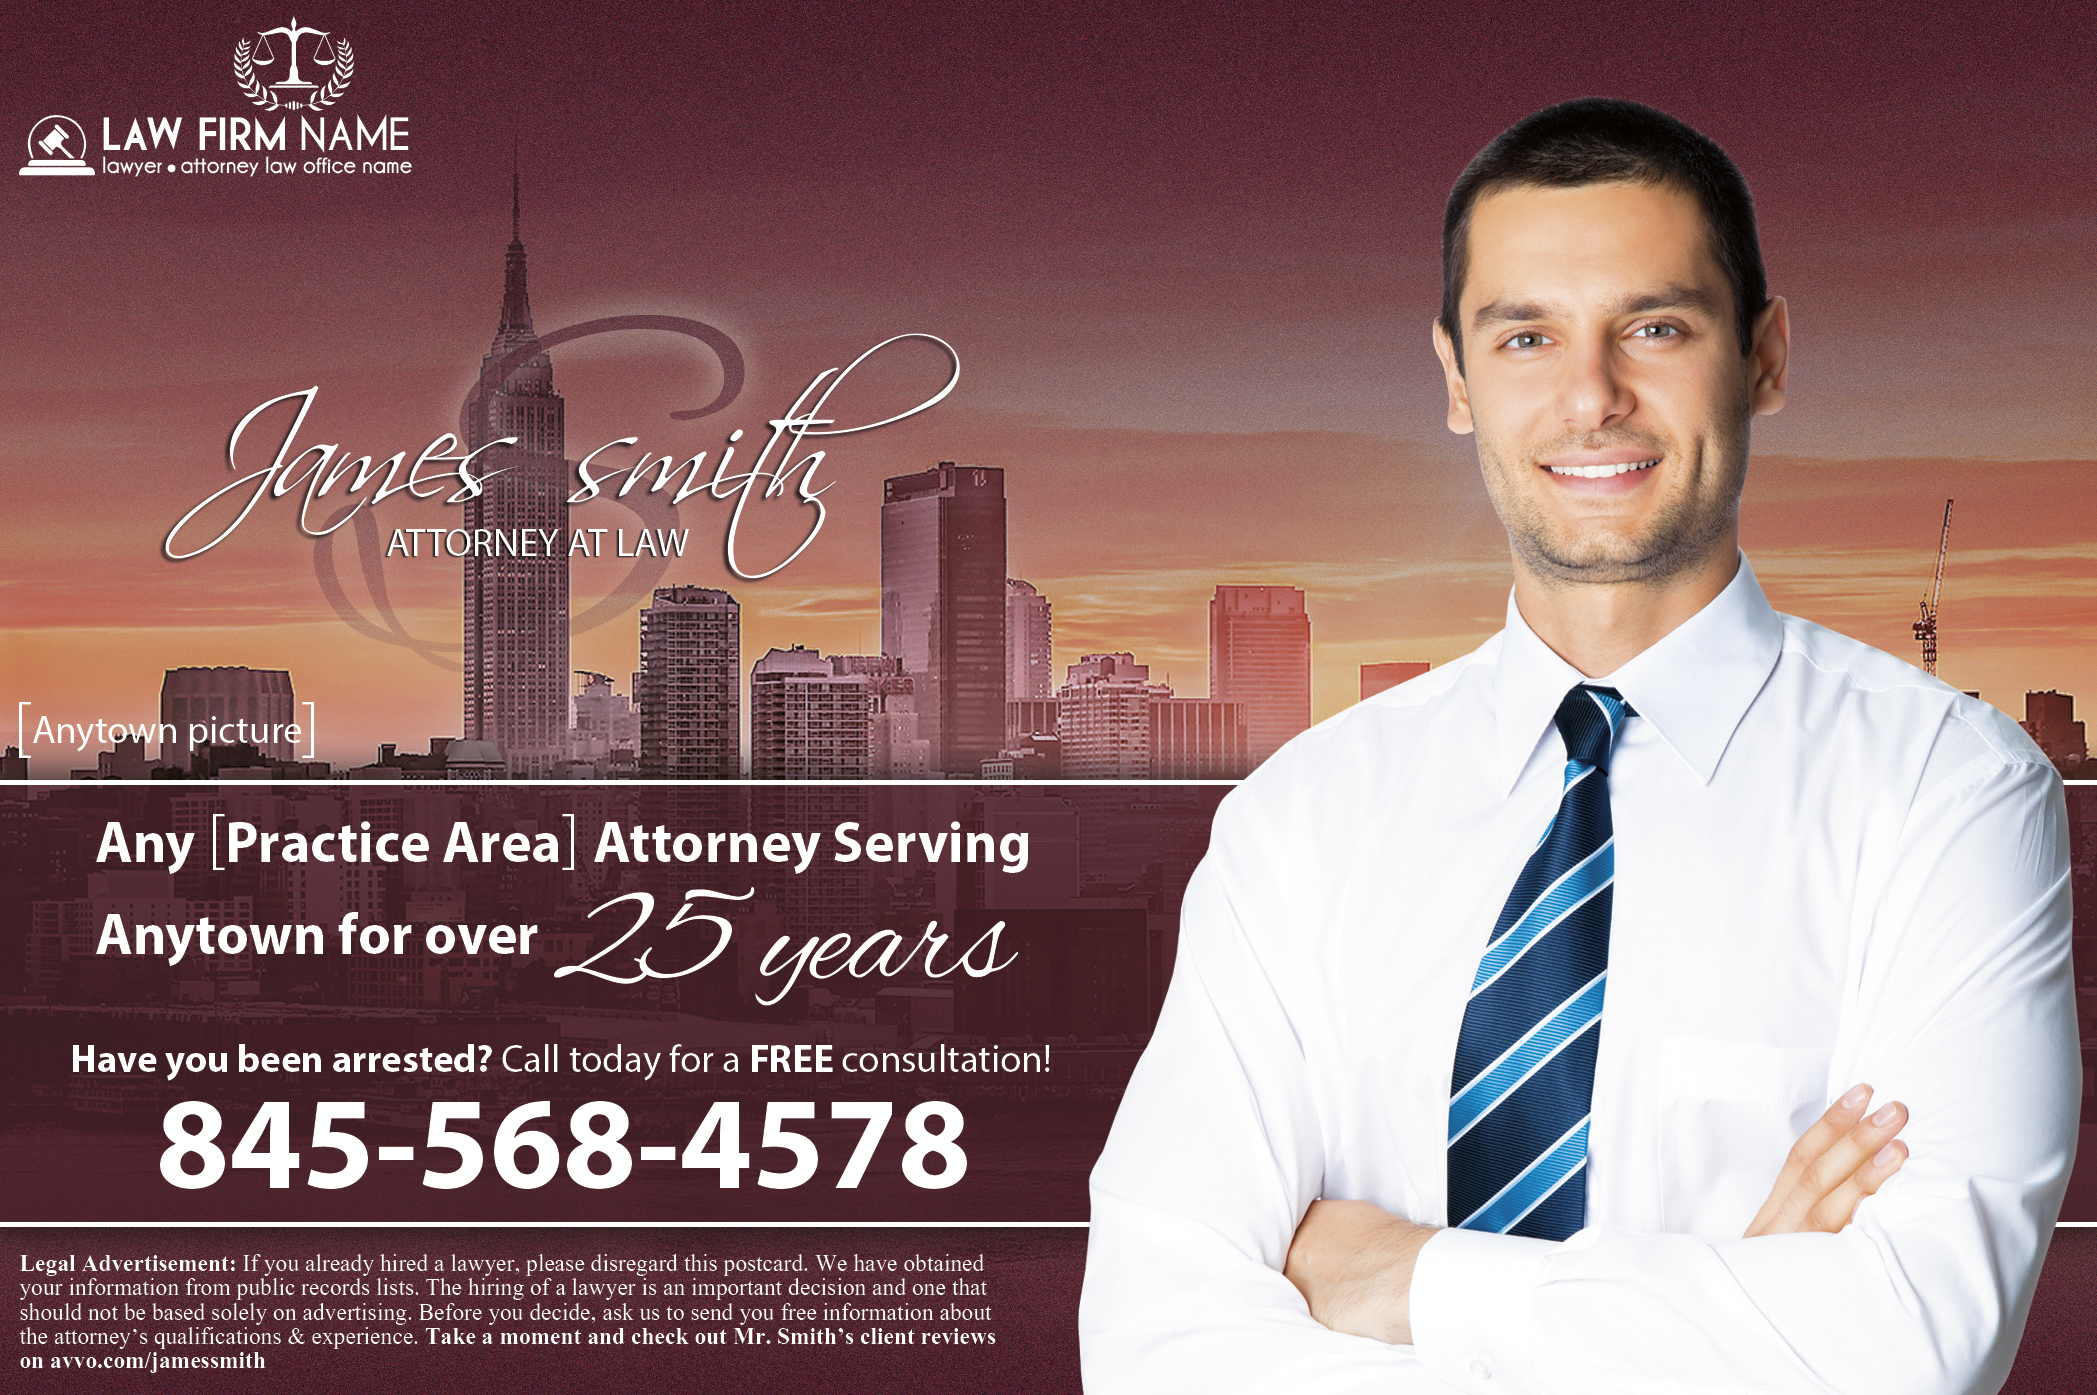 Lawyer Postcards, Law Firm Postcards, Attorney Postcards, Legal Postcards, Law Office Postcards, Criminal Defense Postcards, Criminal Law Postcards, Car Accident Postcards, Wrongful Death Postcards